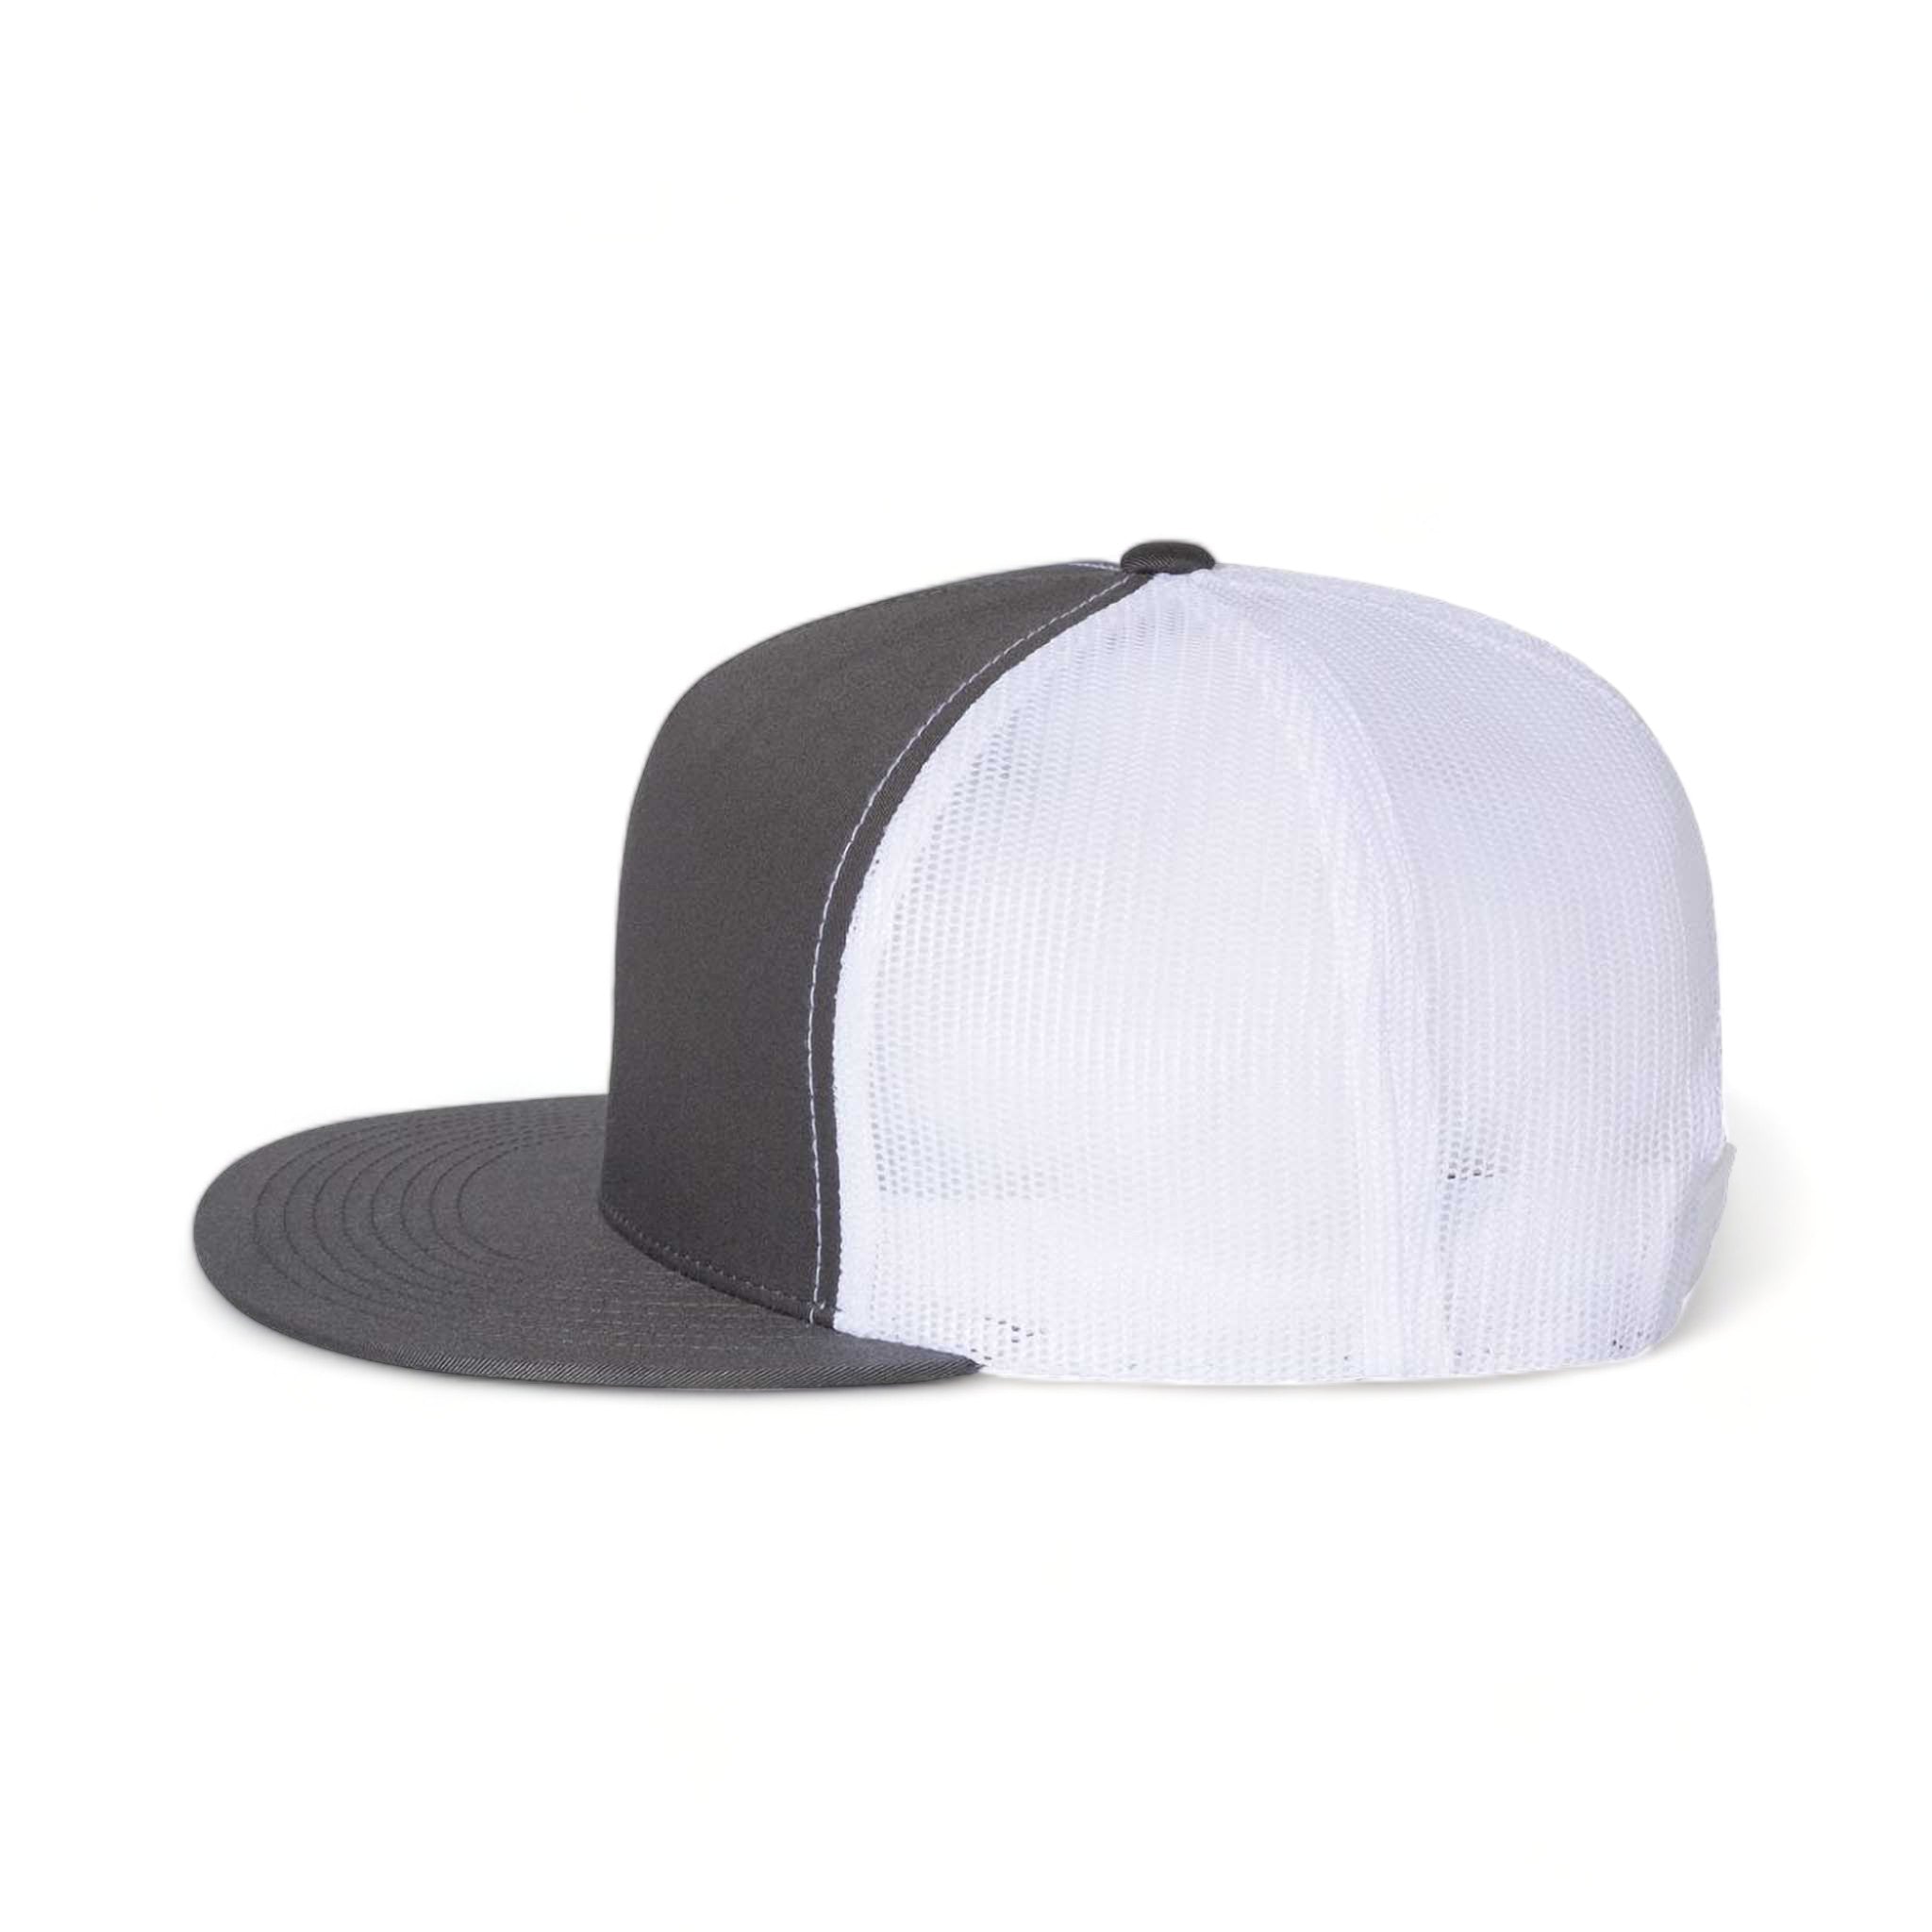 Side view of YP Classics 6006 custom hat in charcoal and white